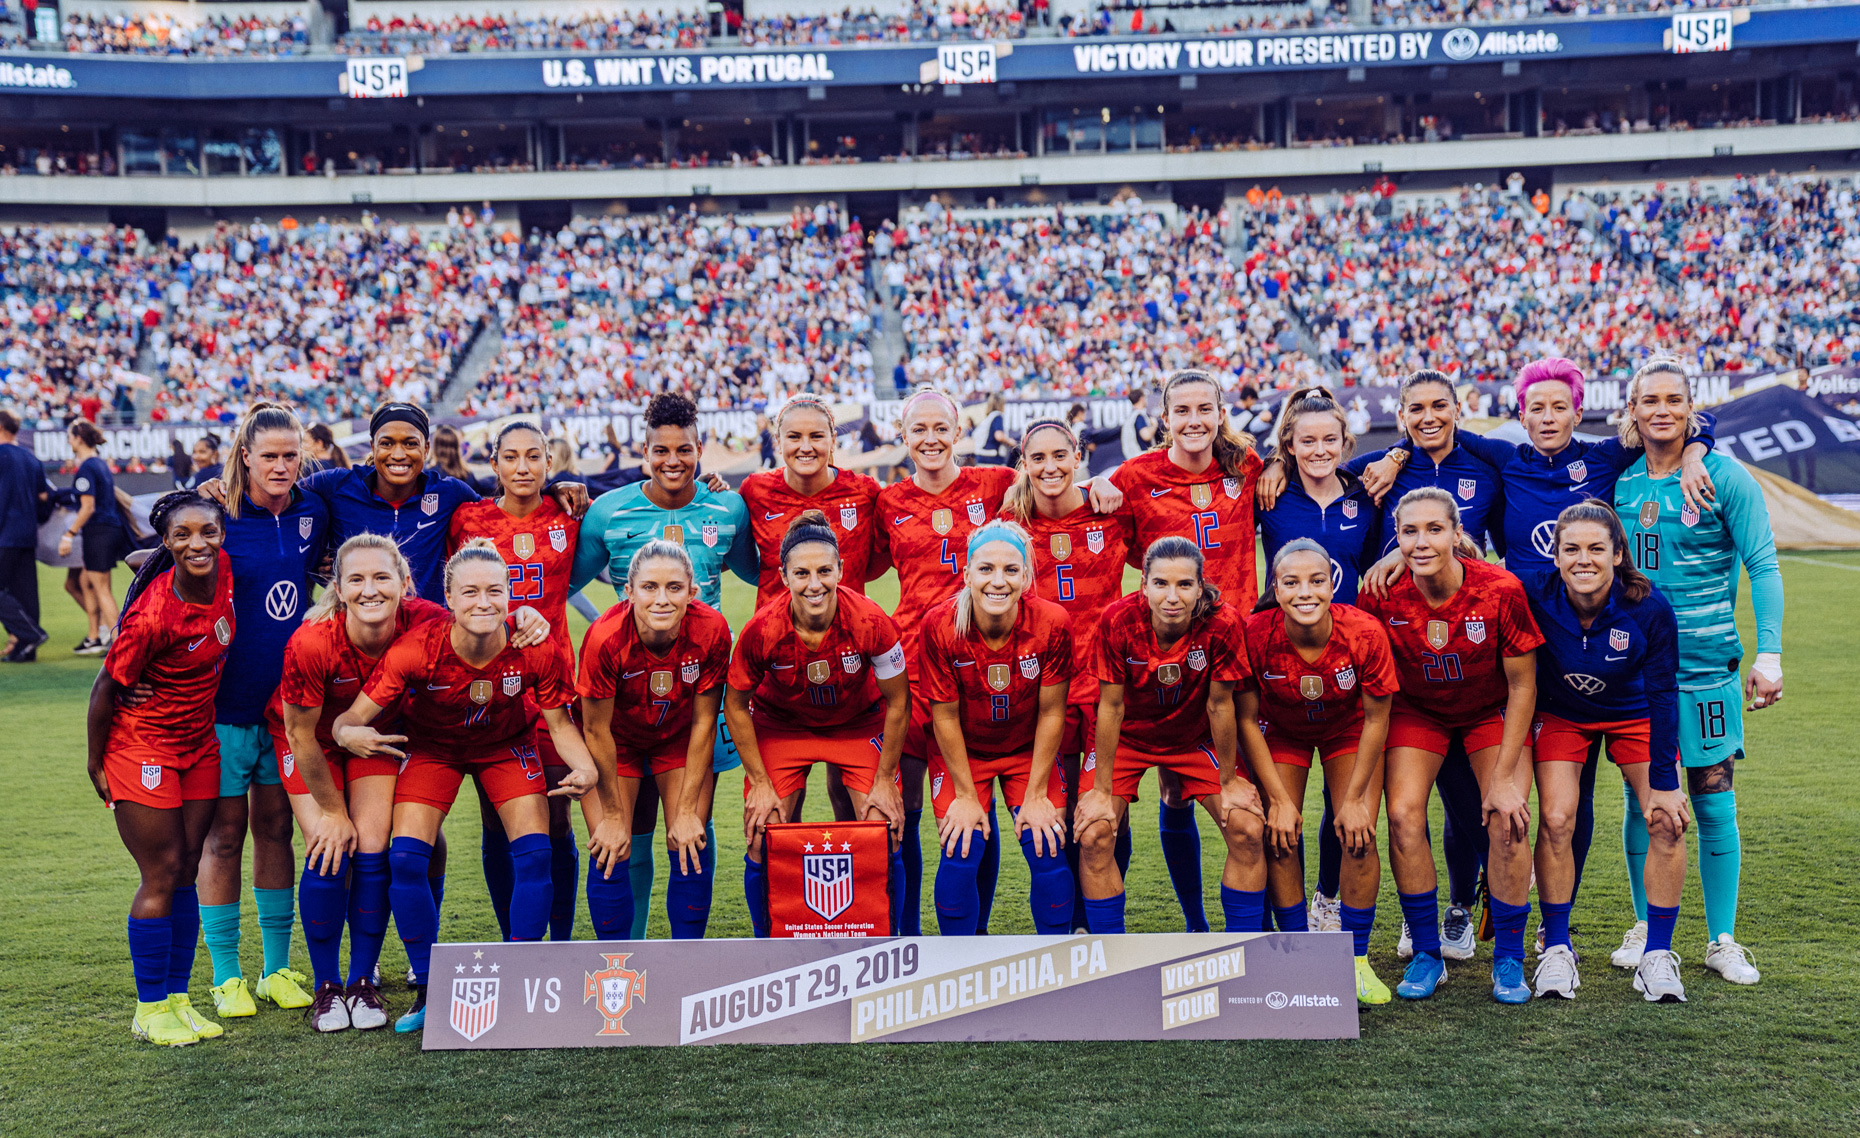 USWNT victory tour